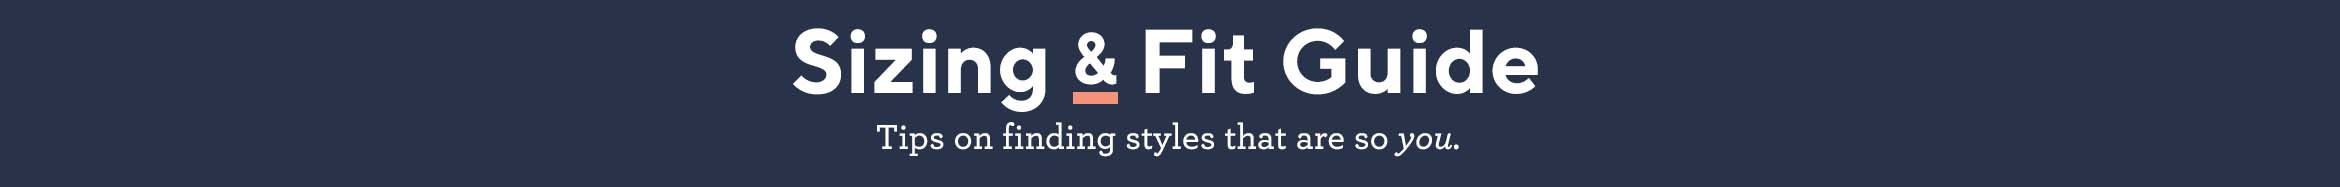 Sizing & Fit Guide.  Tips on finding styles that are so you.